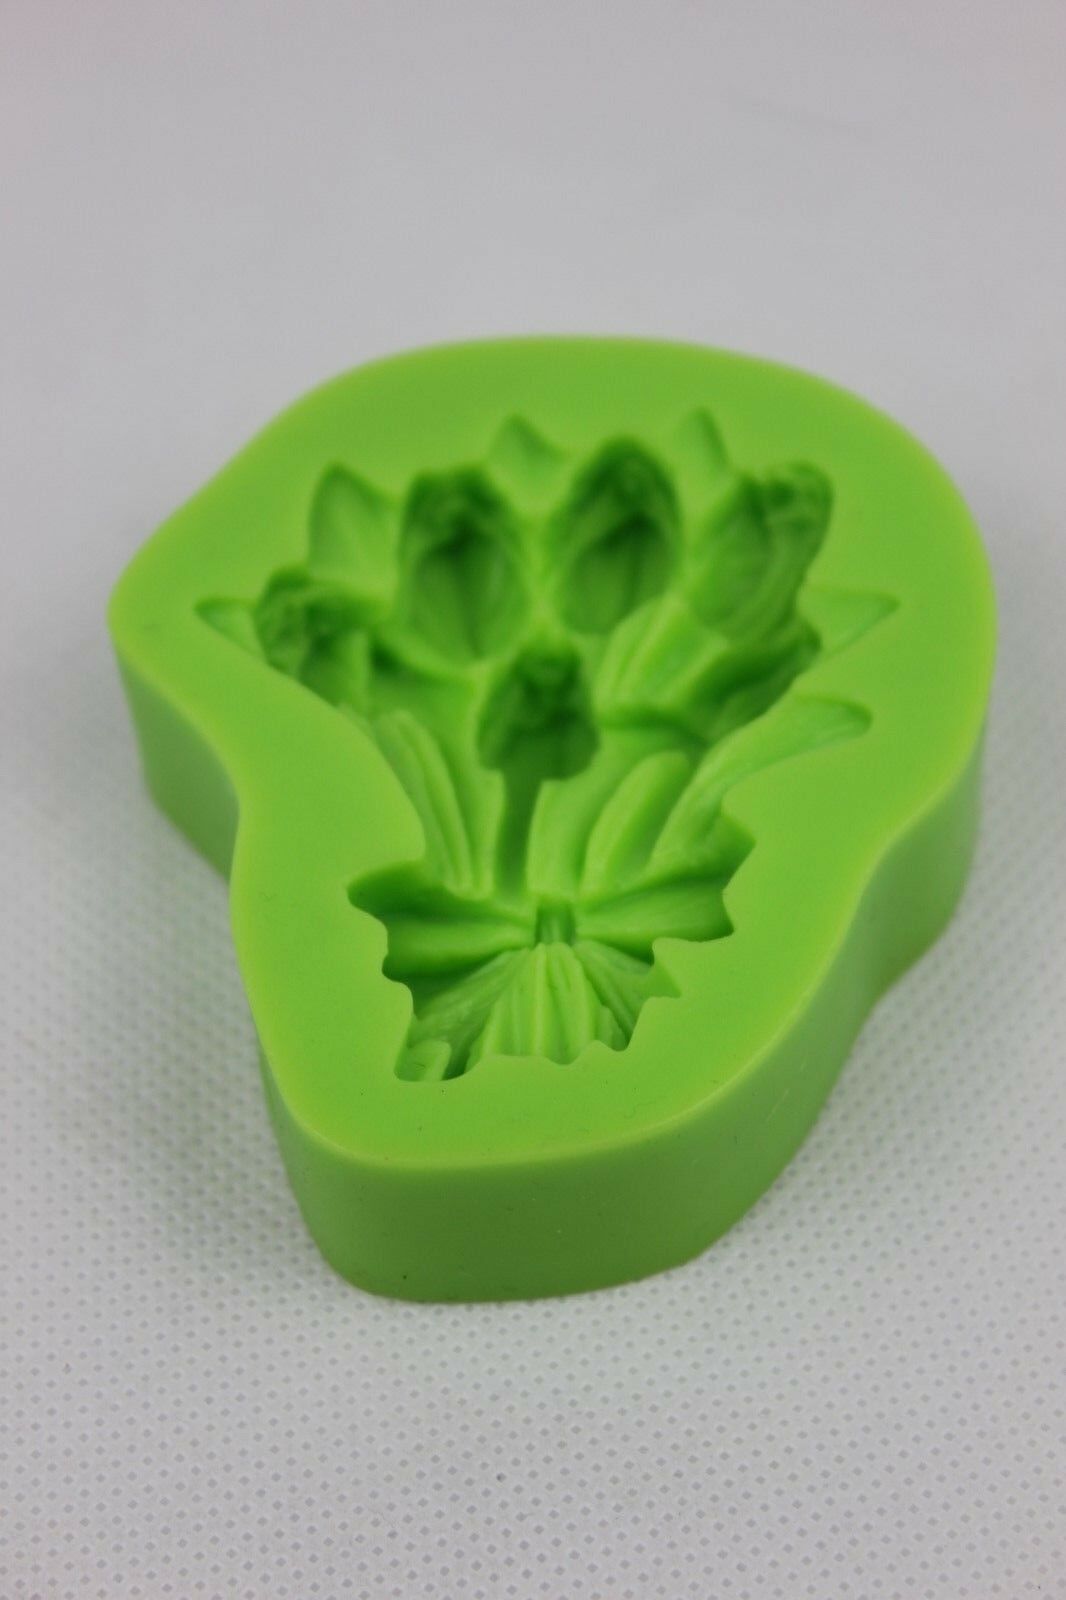 attachment-https://www.cupcakeaddicts.co.uk/wp-content/uploads/imported/0/Bunch-of-Flowers-Silicone-Mould-Cake-Icing-Baking-Mother-Easter-Decorate-Topper-323034971610.jpg